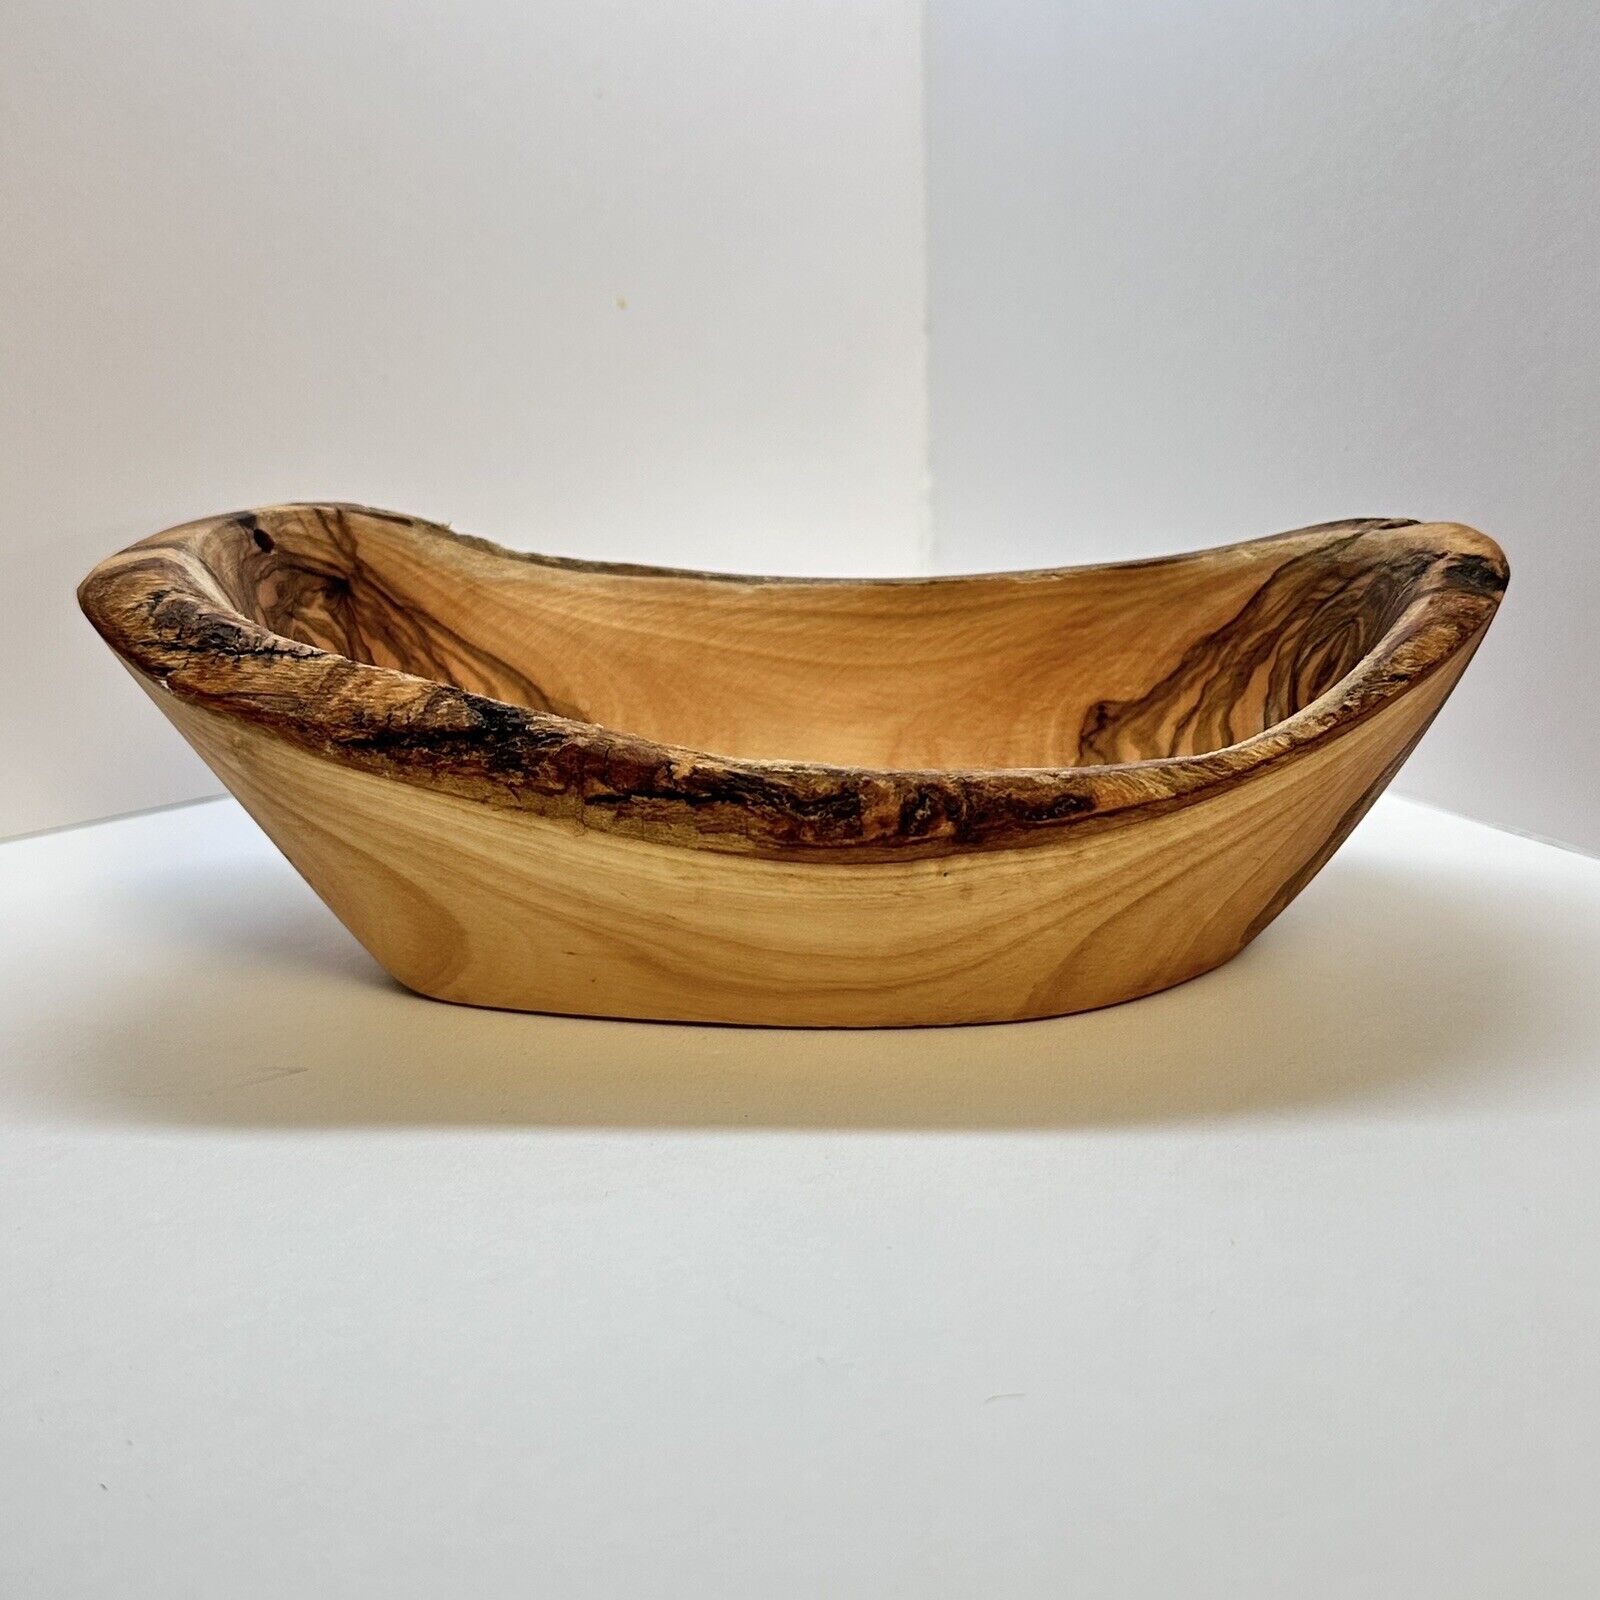 Hand Crafted Rustic Primitive Small Decorative Artisan Wooden Bowl